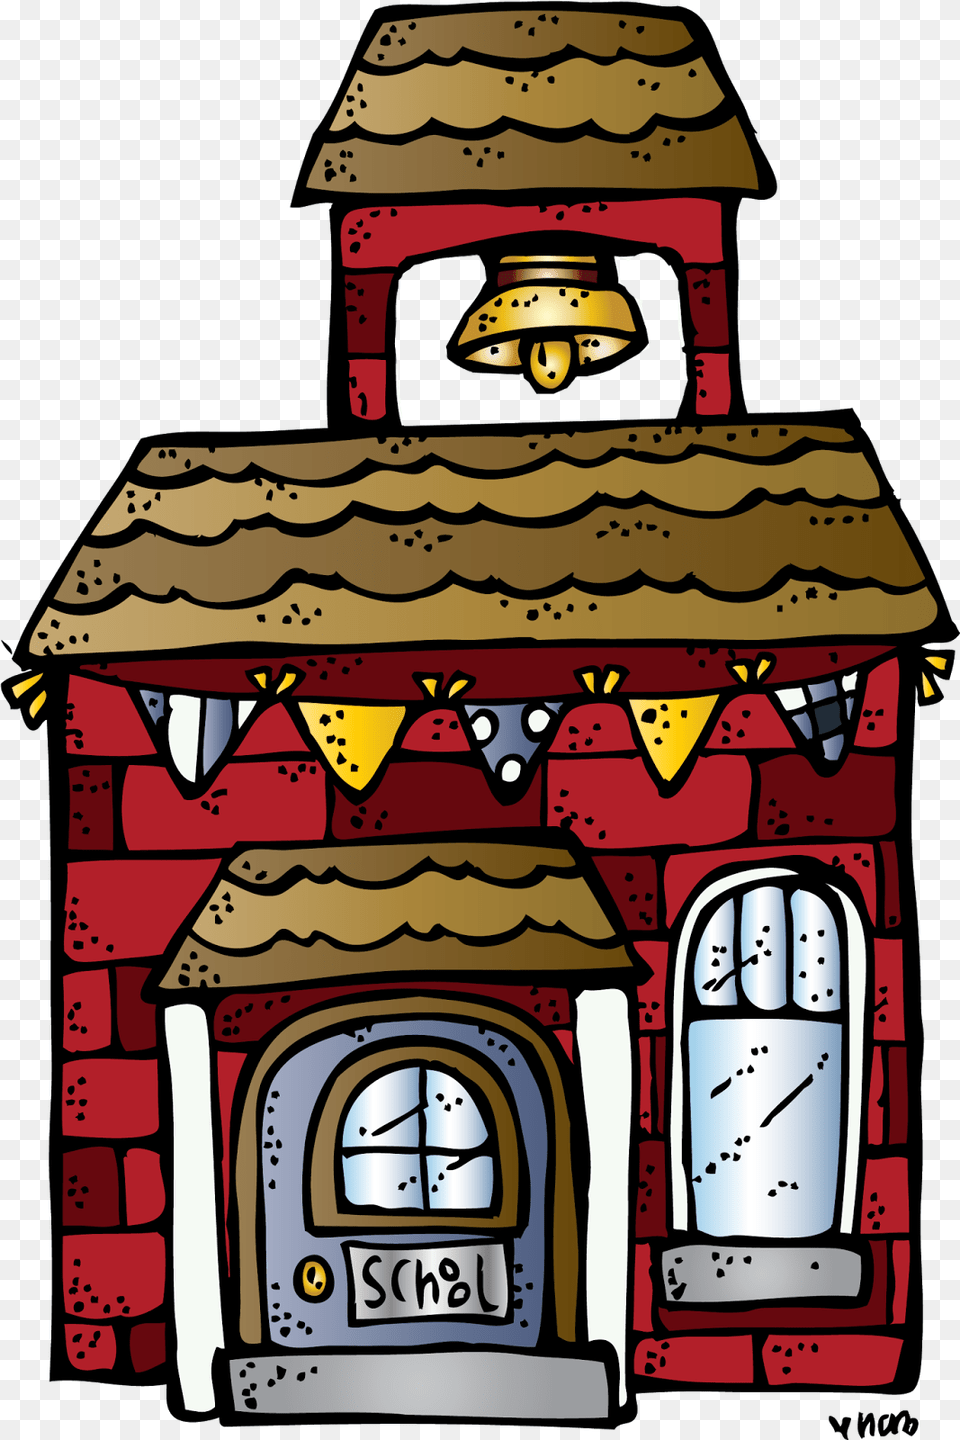 Resources, Architecture, Building, Clock Tower, Tower Png Image